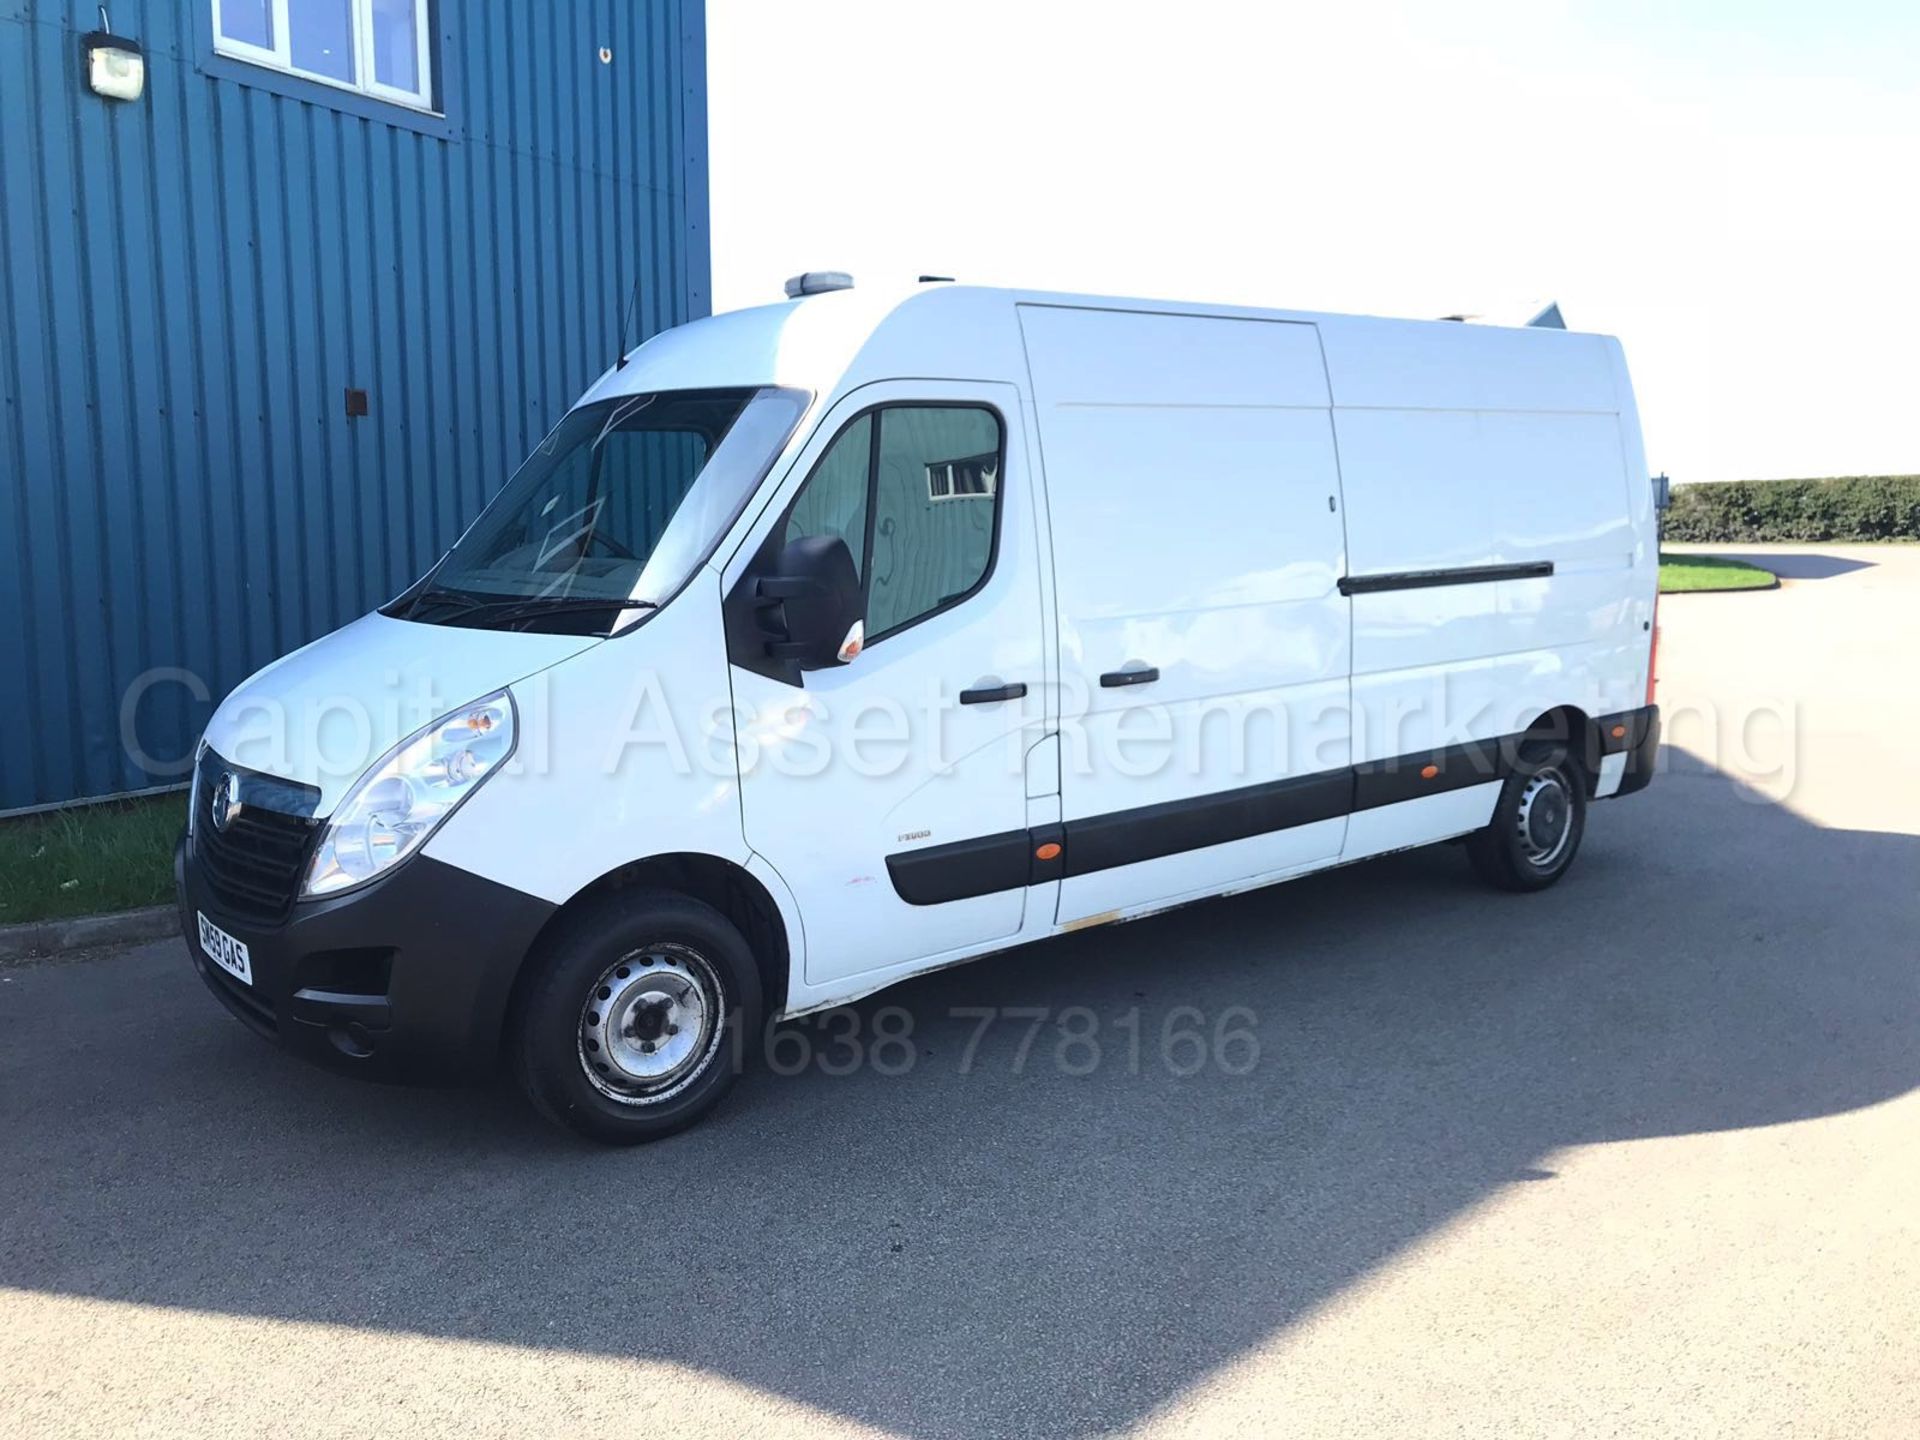 (On Sale) VAUXHALL MOVANO F3500 'LWB HI-ROOF' (2013 MODEL) '2.3 CDTI - 125 BHP - 6 SPEED' *AIR CON* - Image 5 of 21